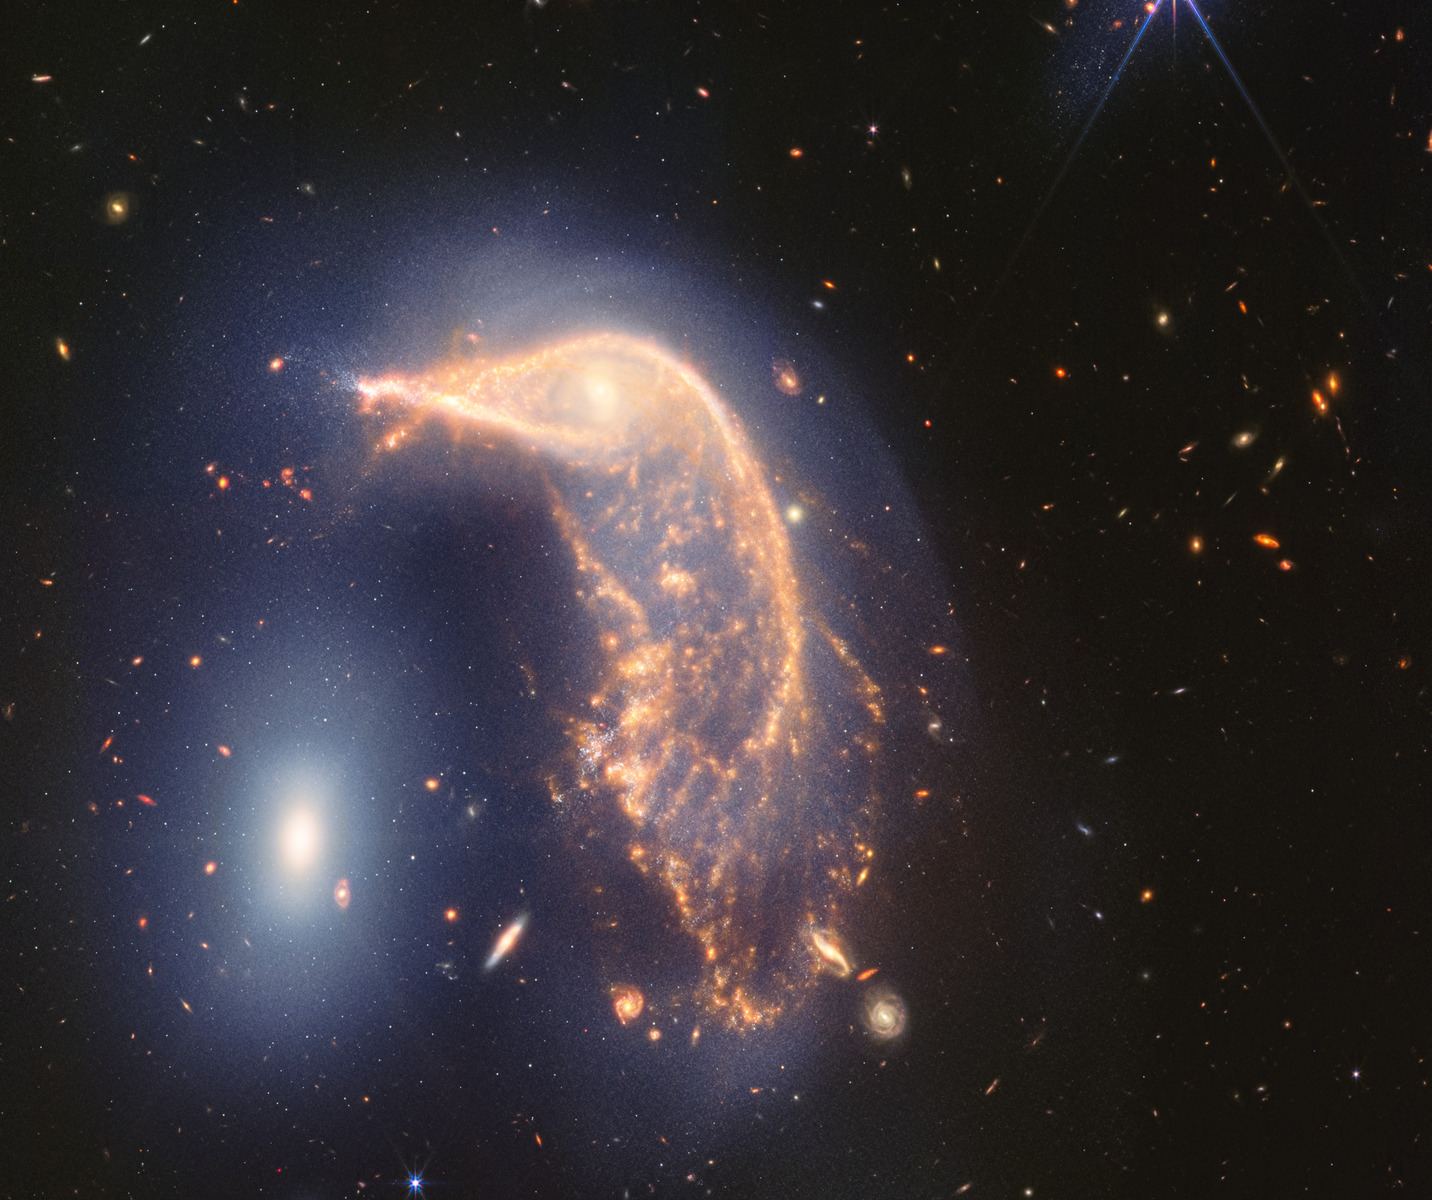 This “penguin party” (called Arp 142) is loud! The distorted spiral galaxy at center, the Penguin, and the compact elliptical galaxy at left, the Egg, are locked in an active embrace. A new near- and mid-infrared image from the Webb Space Telescope, taken to mark its second year of science, shows that their interaction is marked by a faint upside-down U-shaped blue glow. The blue galaxy at upper right (near bright star) is a closer galaxie teeming with new stars. It's not part of the collision and lies closer to Earth than Arp 142.